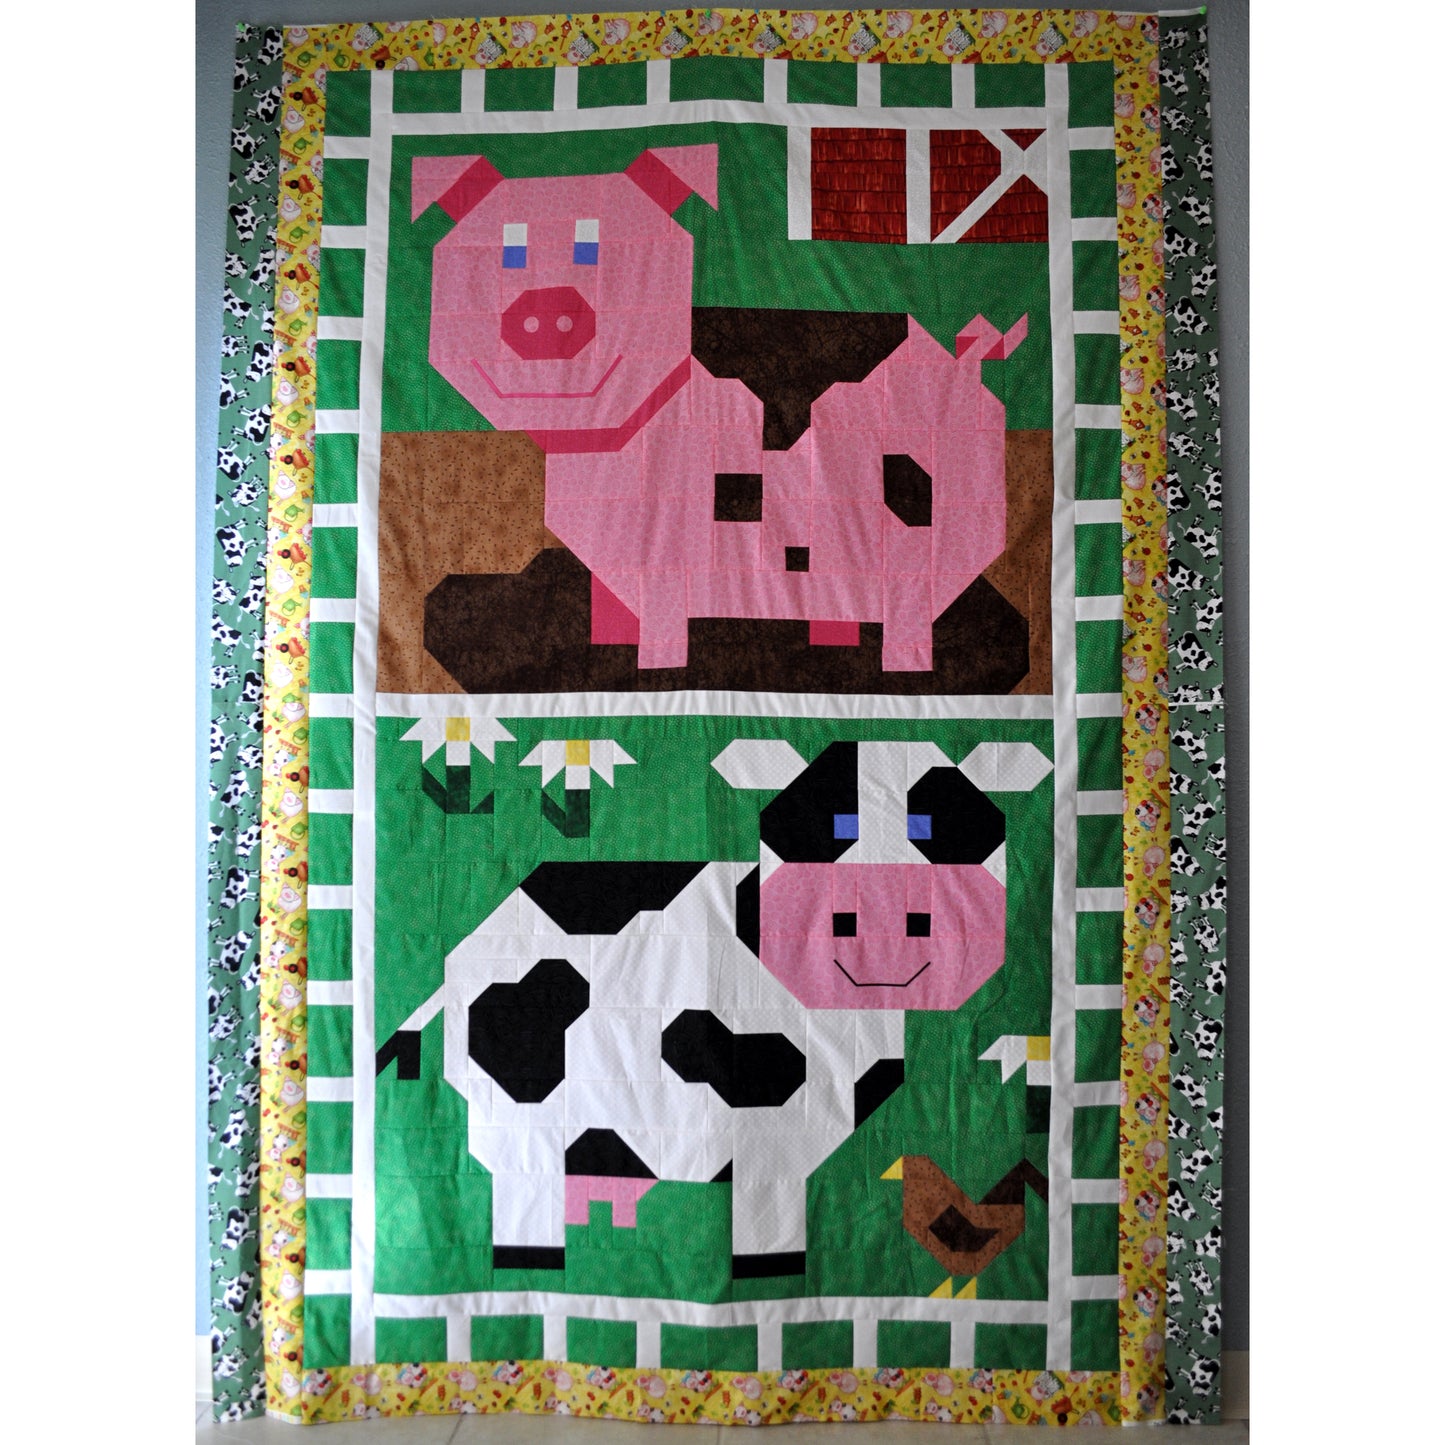 Adorable cow and pick quilt with top of pig smiling in a mud puddle and bottom of cow in grassy field.